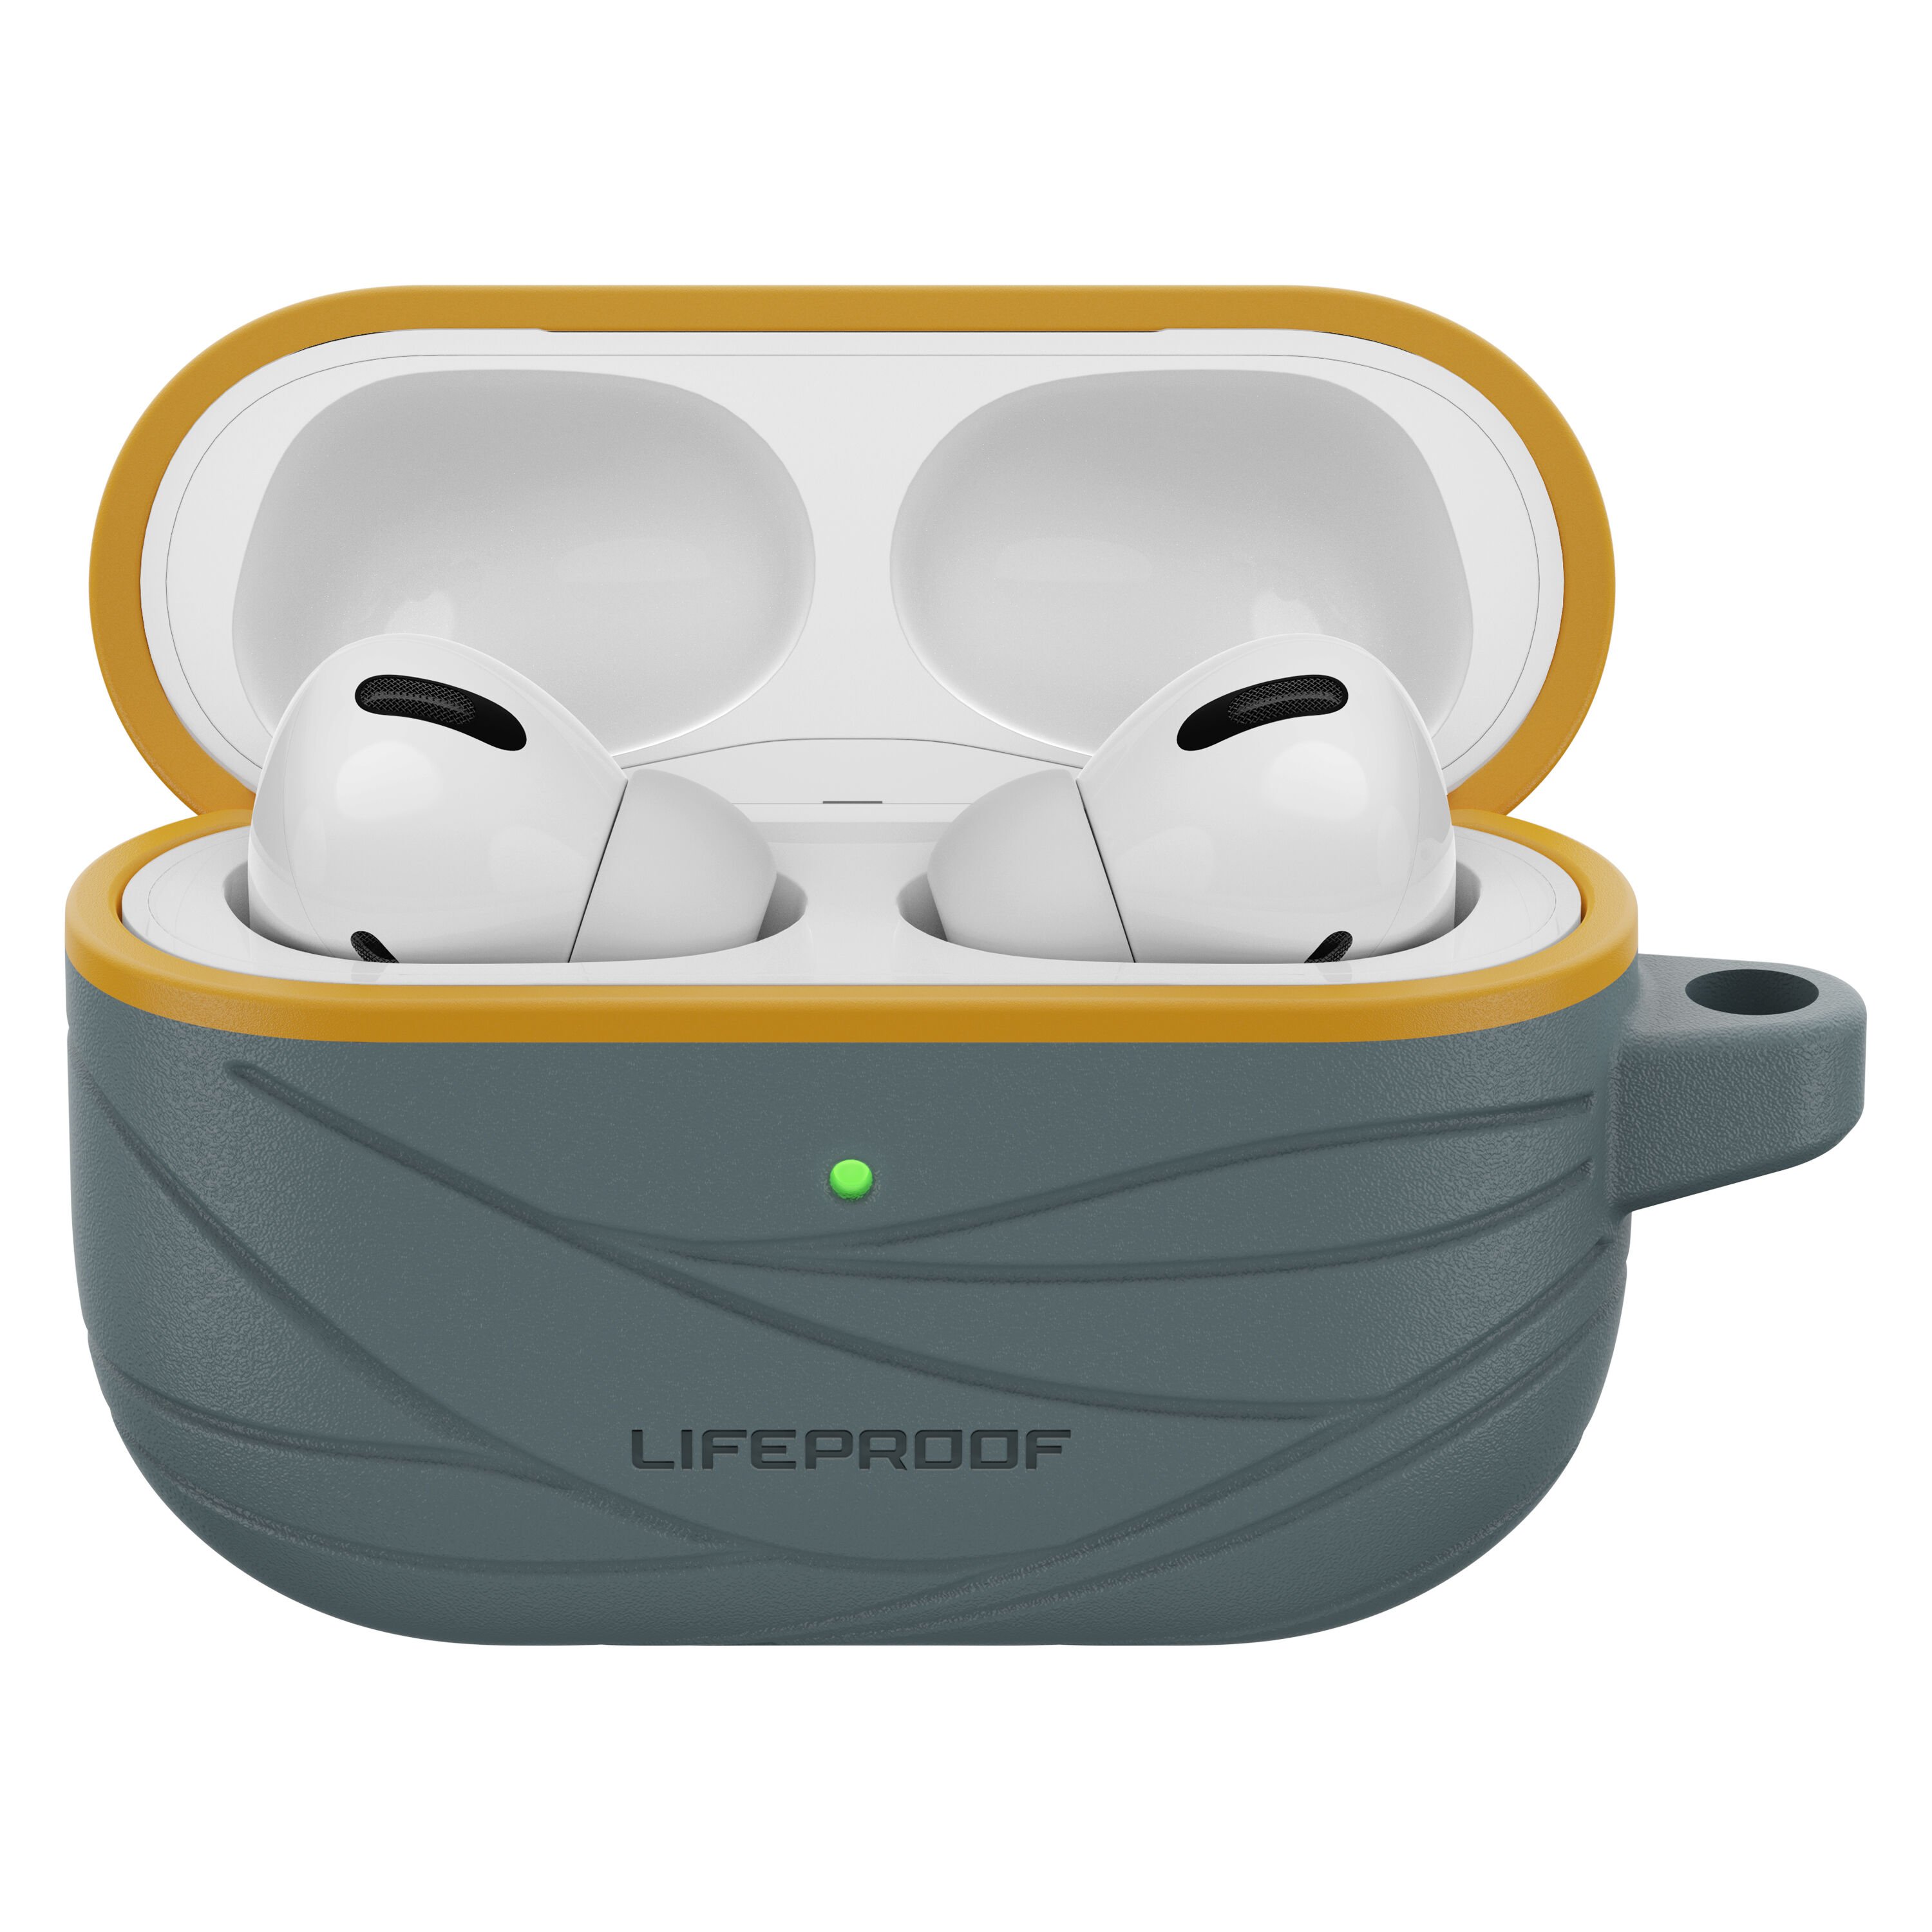 Apple AirPods Pro protective case - style that's sustainable